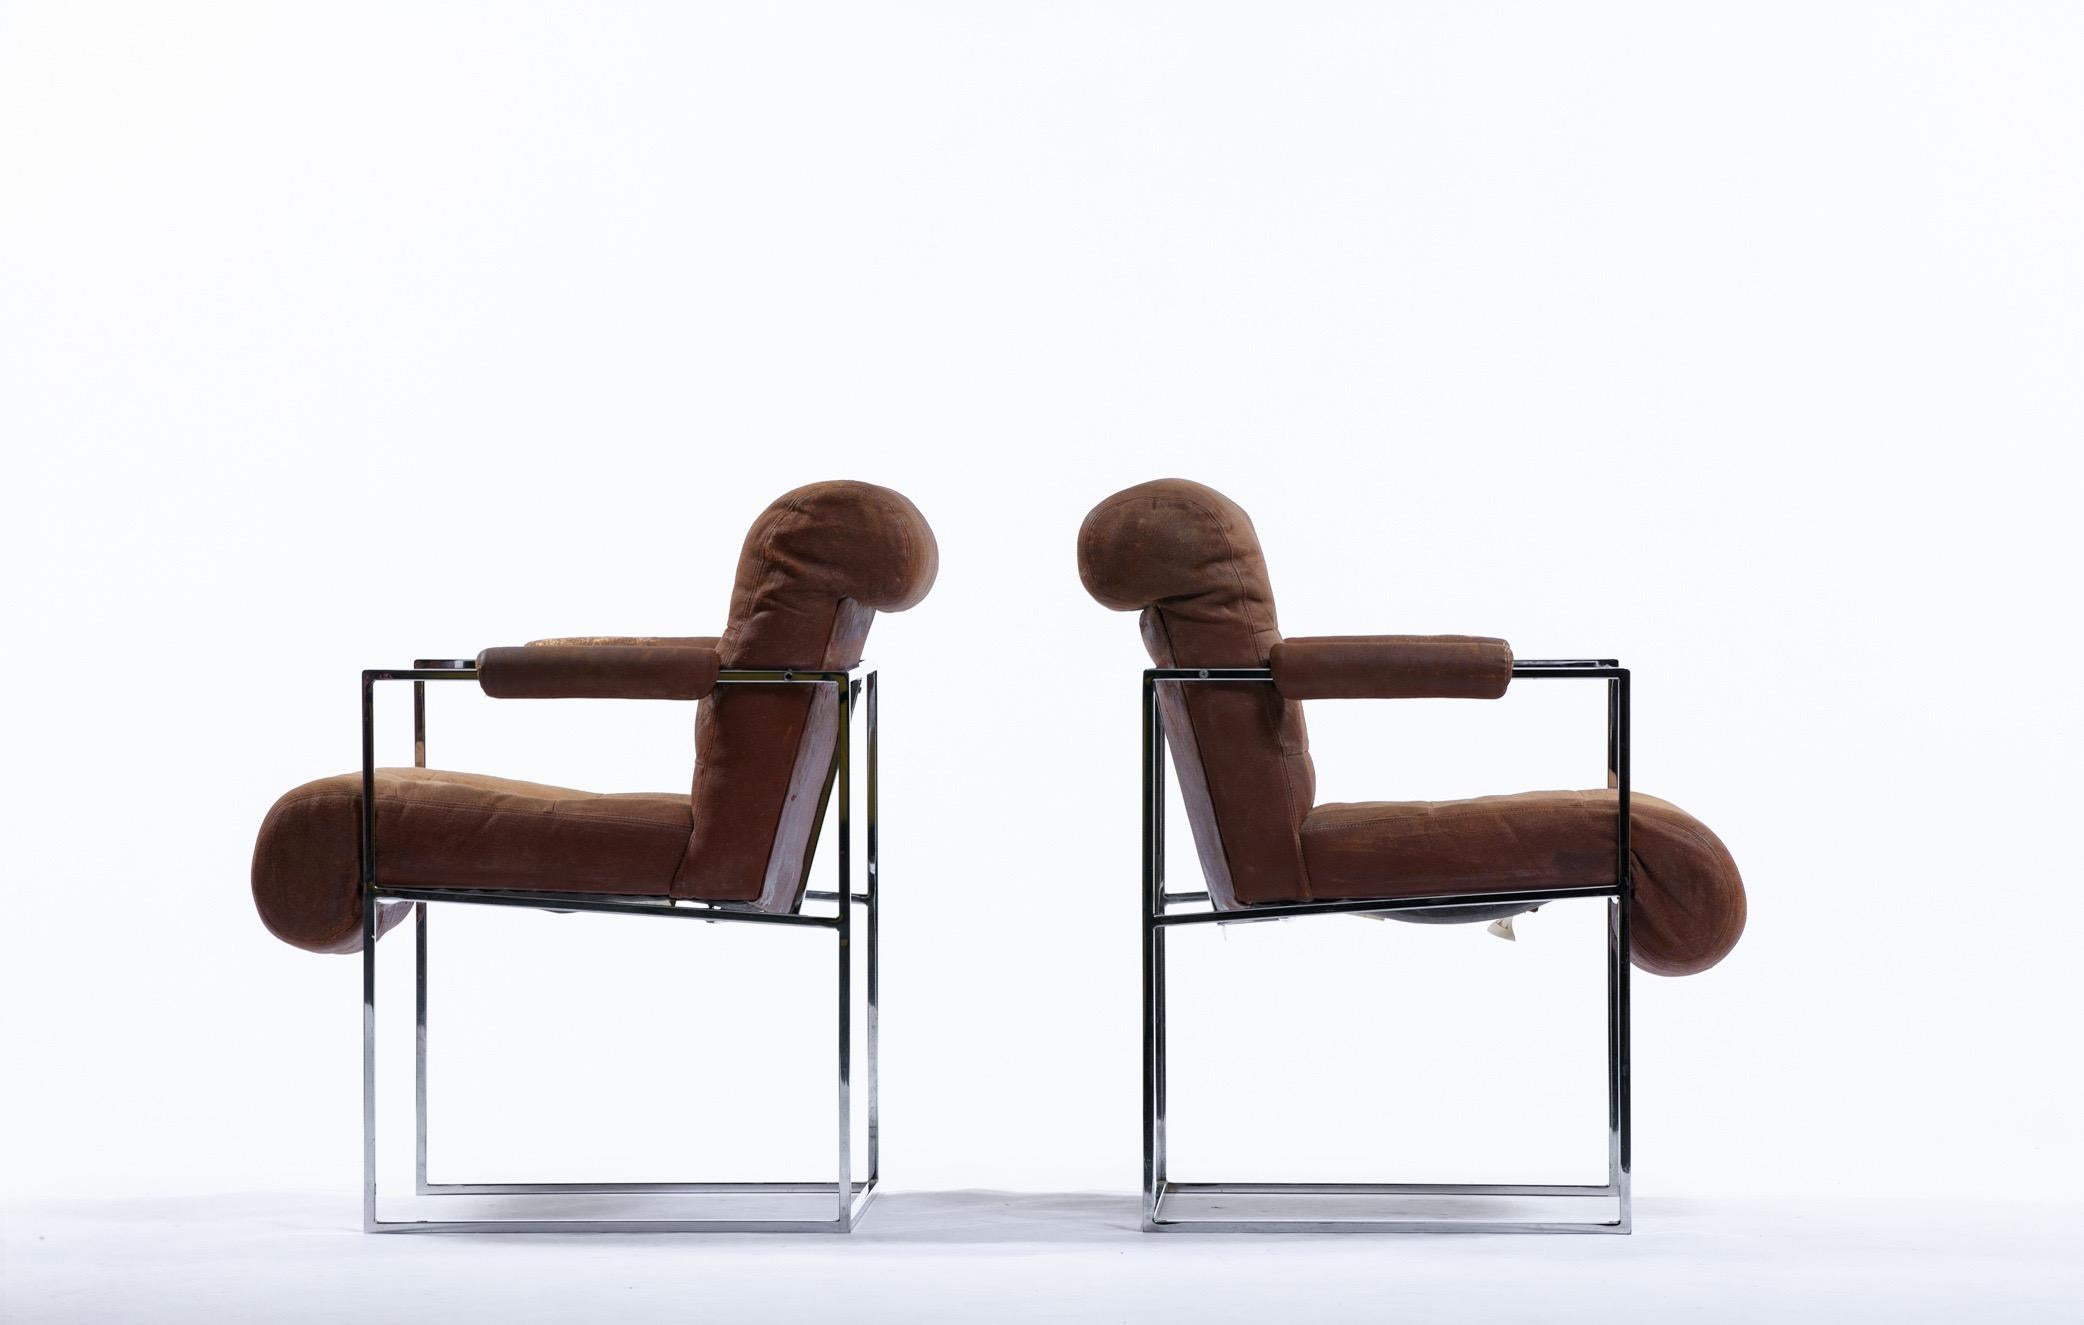 Pair of Milo Baughman thinline architectural chrome frame armchairs, designed in the 1970s for Thayer Coggin. A single armchair also available. These chairs could be used as host or hostess chairs or on their own as occasional chairs. Supreme